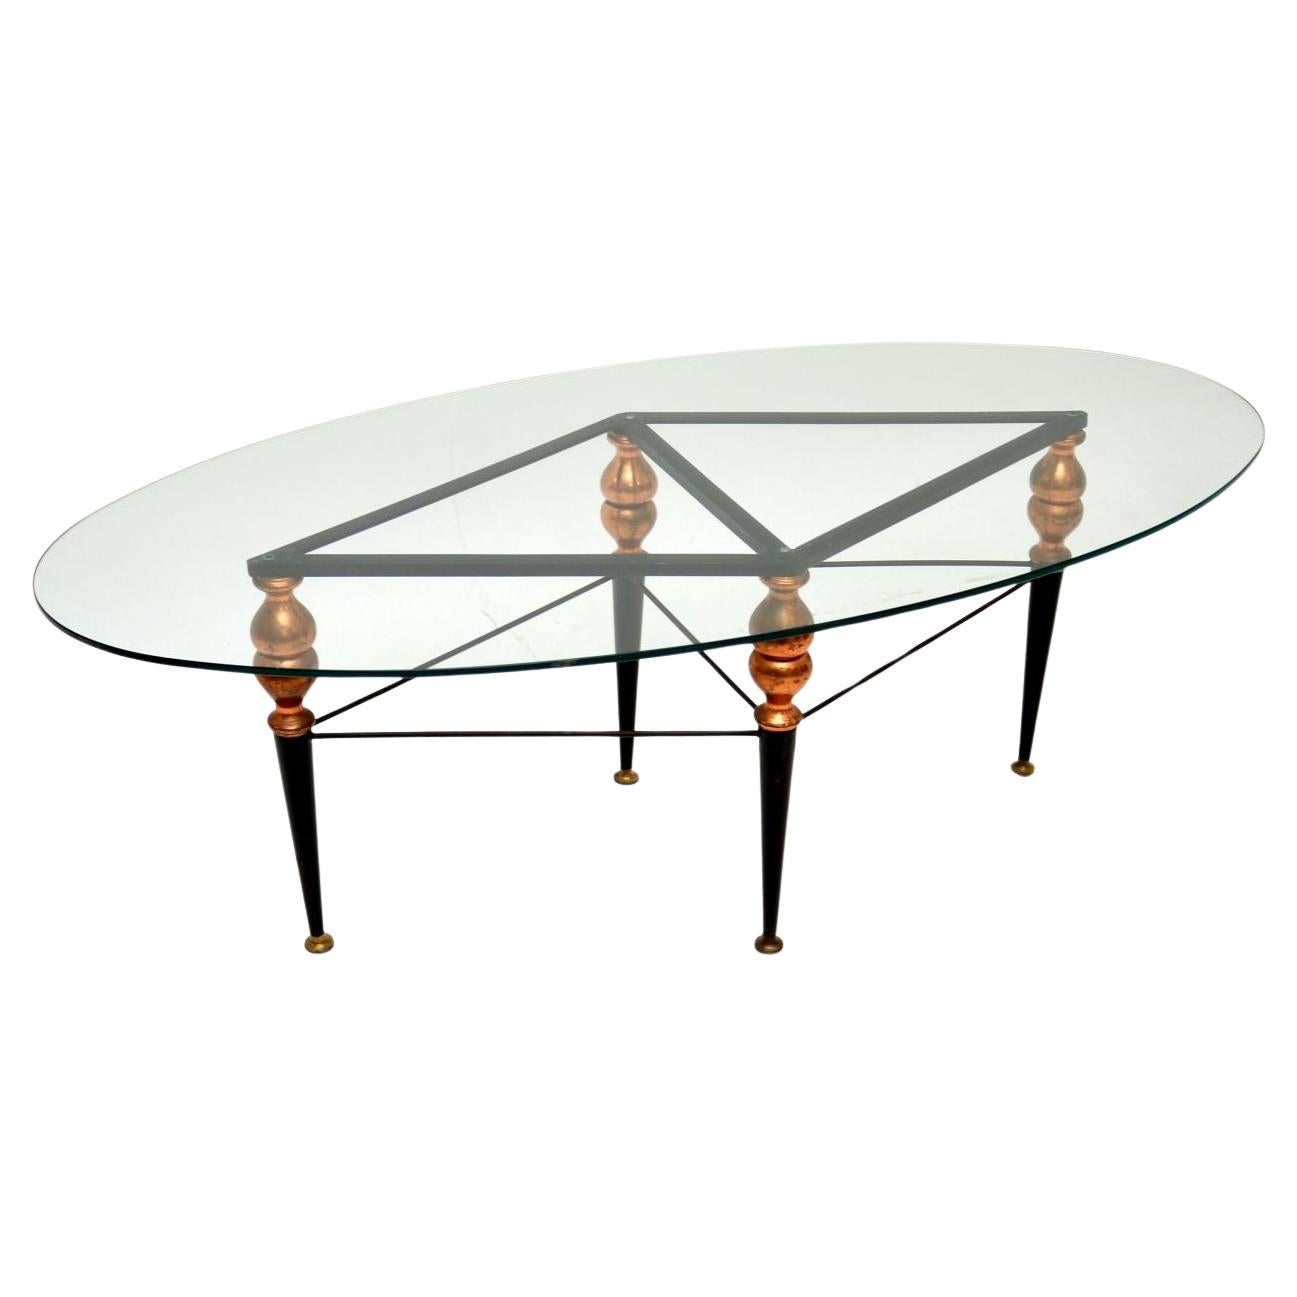 Vintage Italian Steel and Copper Coffee Table